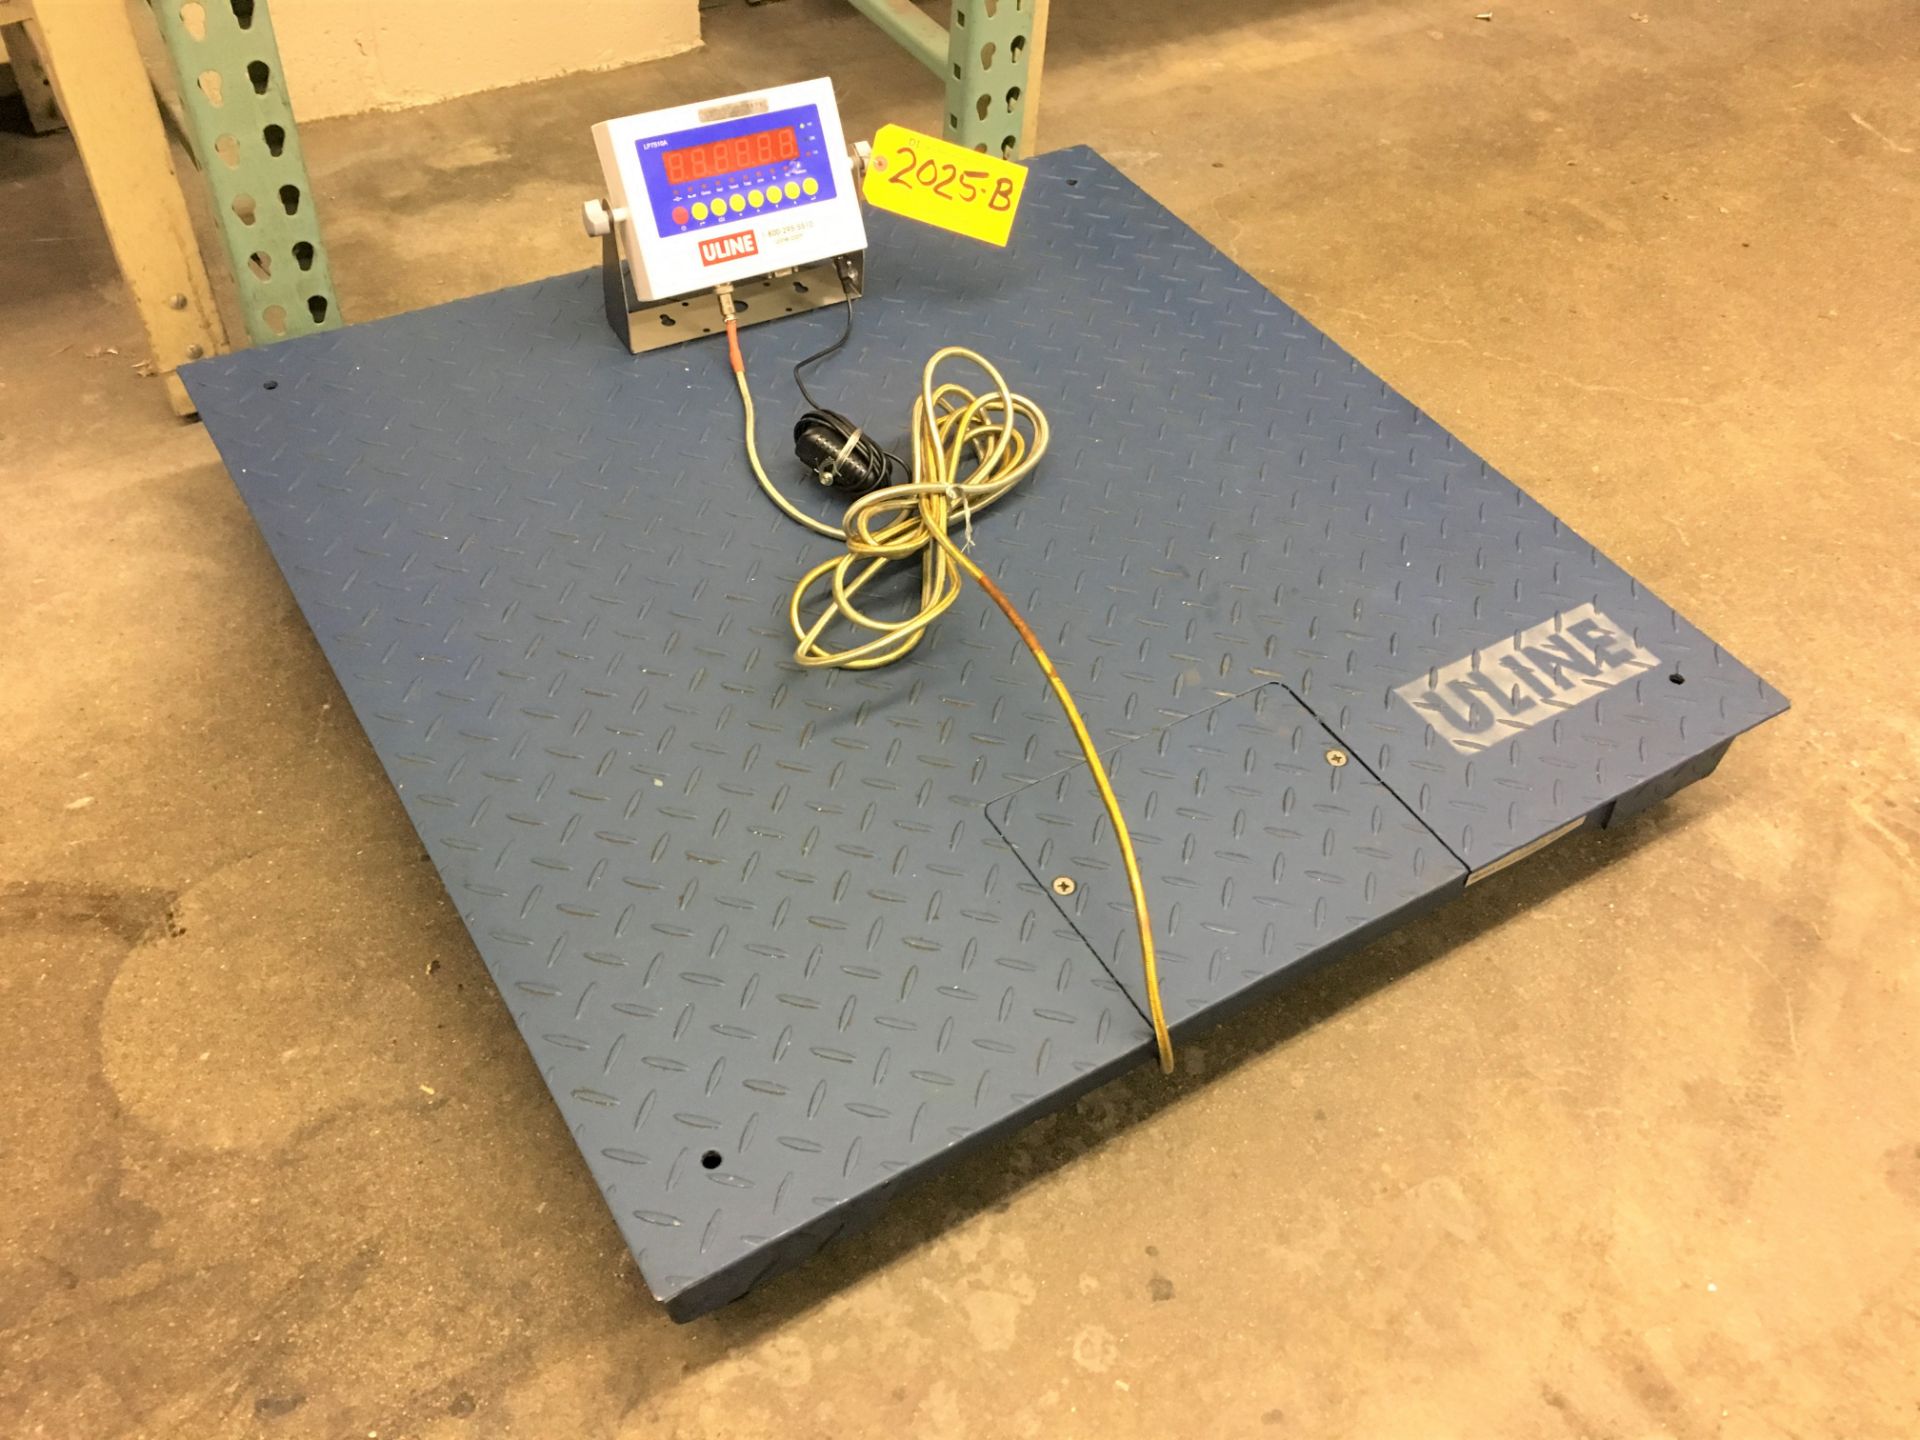 INDIANA SCALE COMPANY # LP-7510A (10,000 LB. CAPACITY.) DIGITAL 36" x 36" PLATFORM SCALE (*SEE